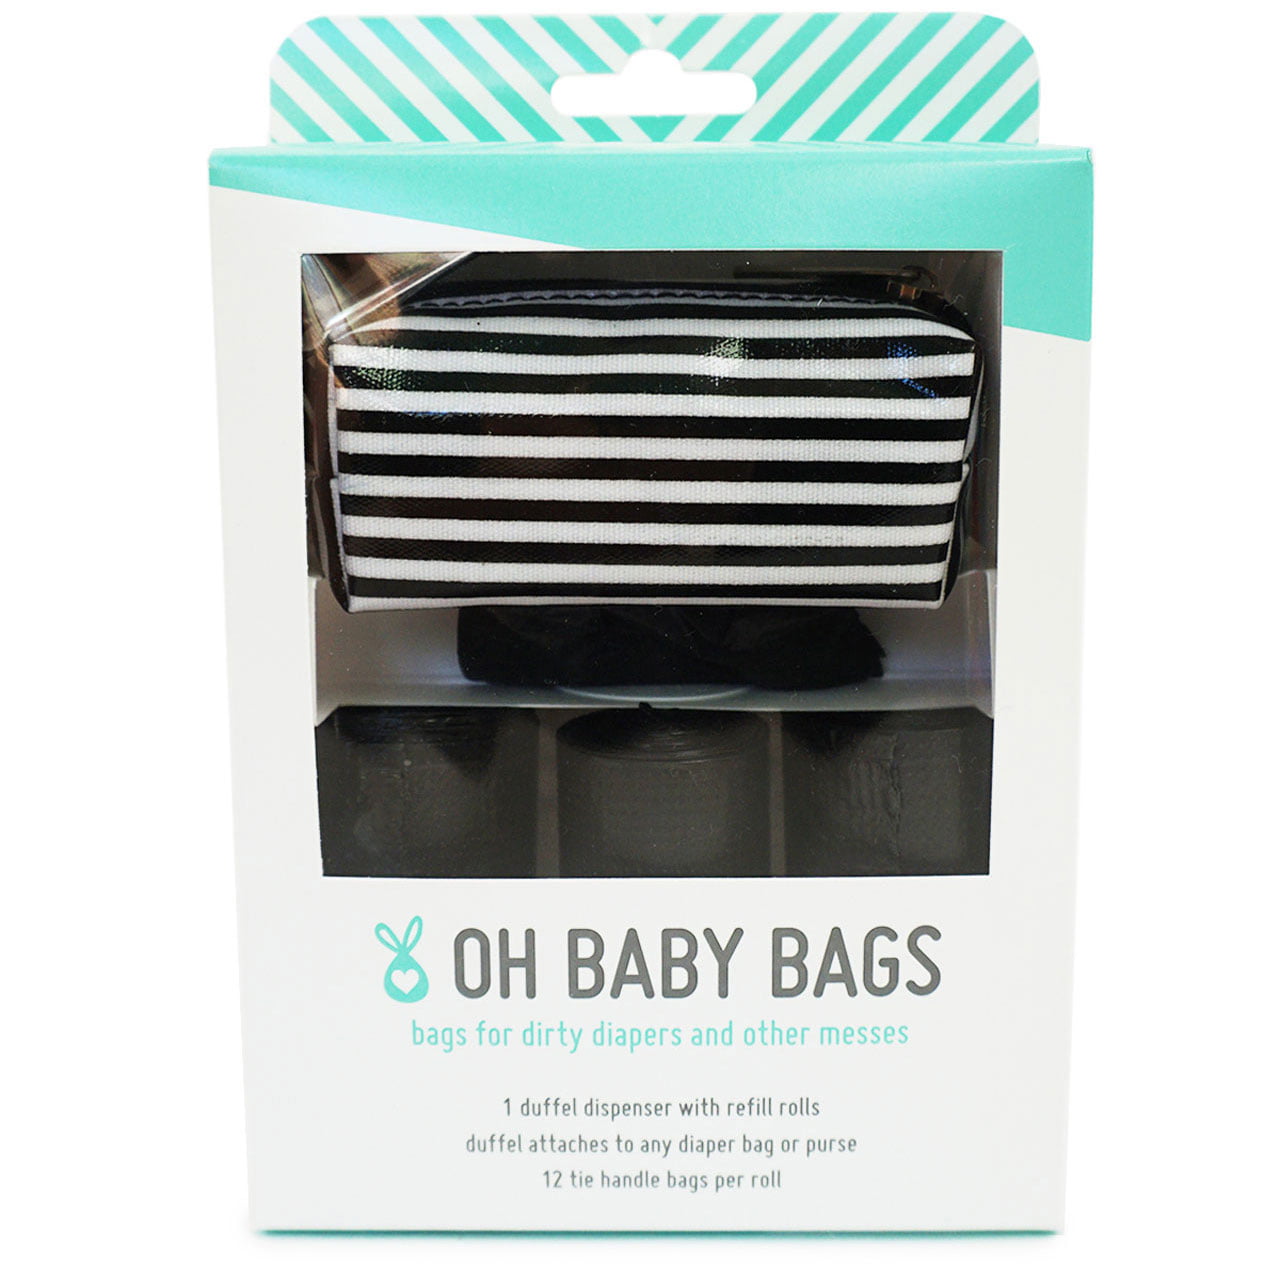 Oh Baby Bags Diaper Bag Clip-On Dispenser Gift Box with Disposable Bags for Dirty Diapers ...